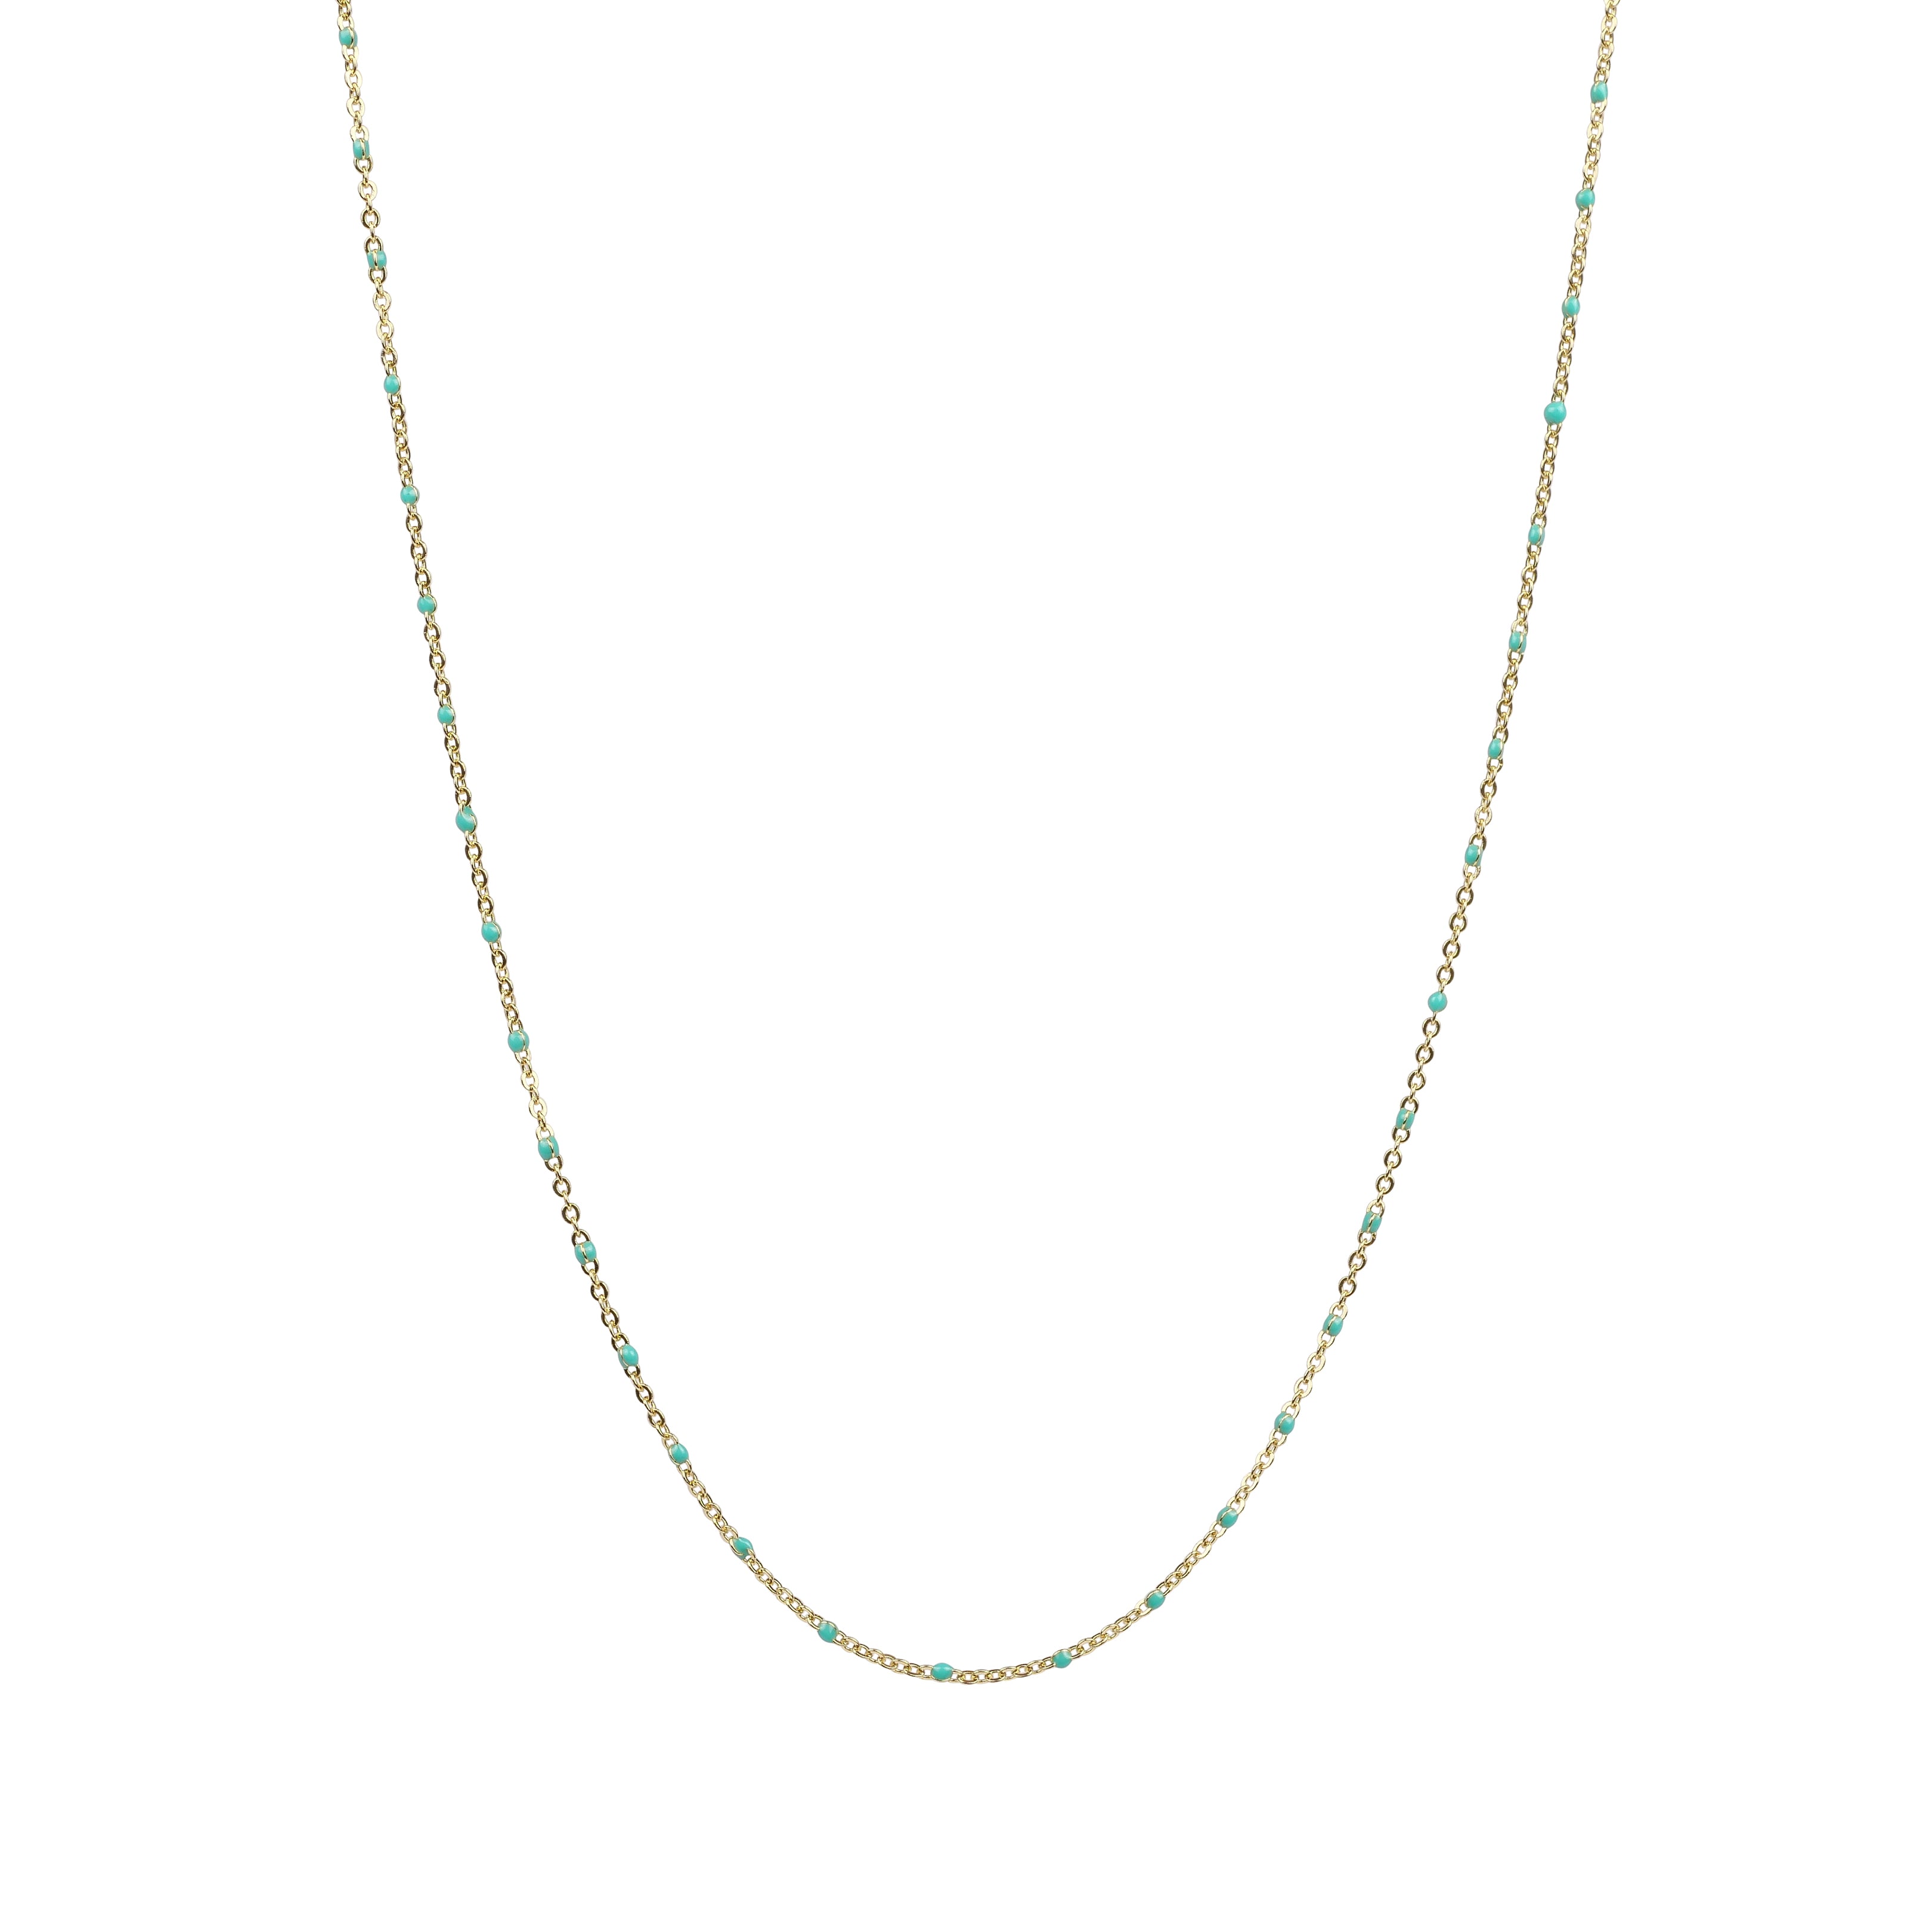 Delicate Green Bead Chain in Gold